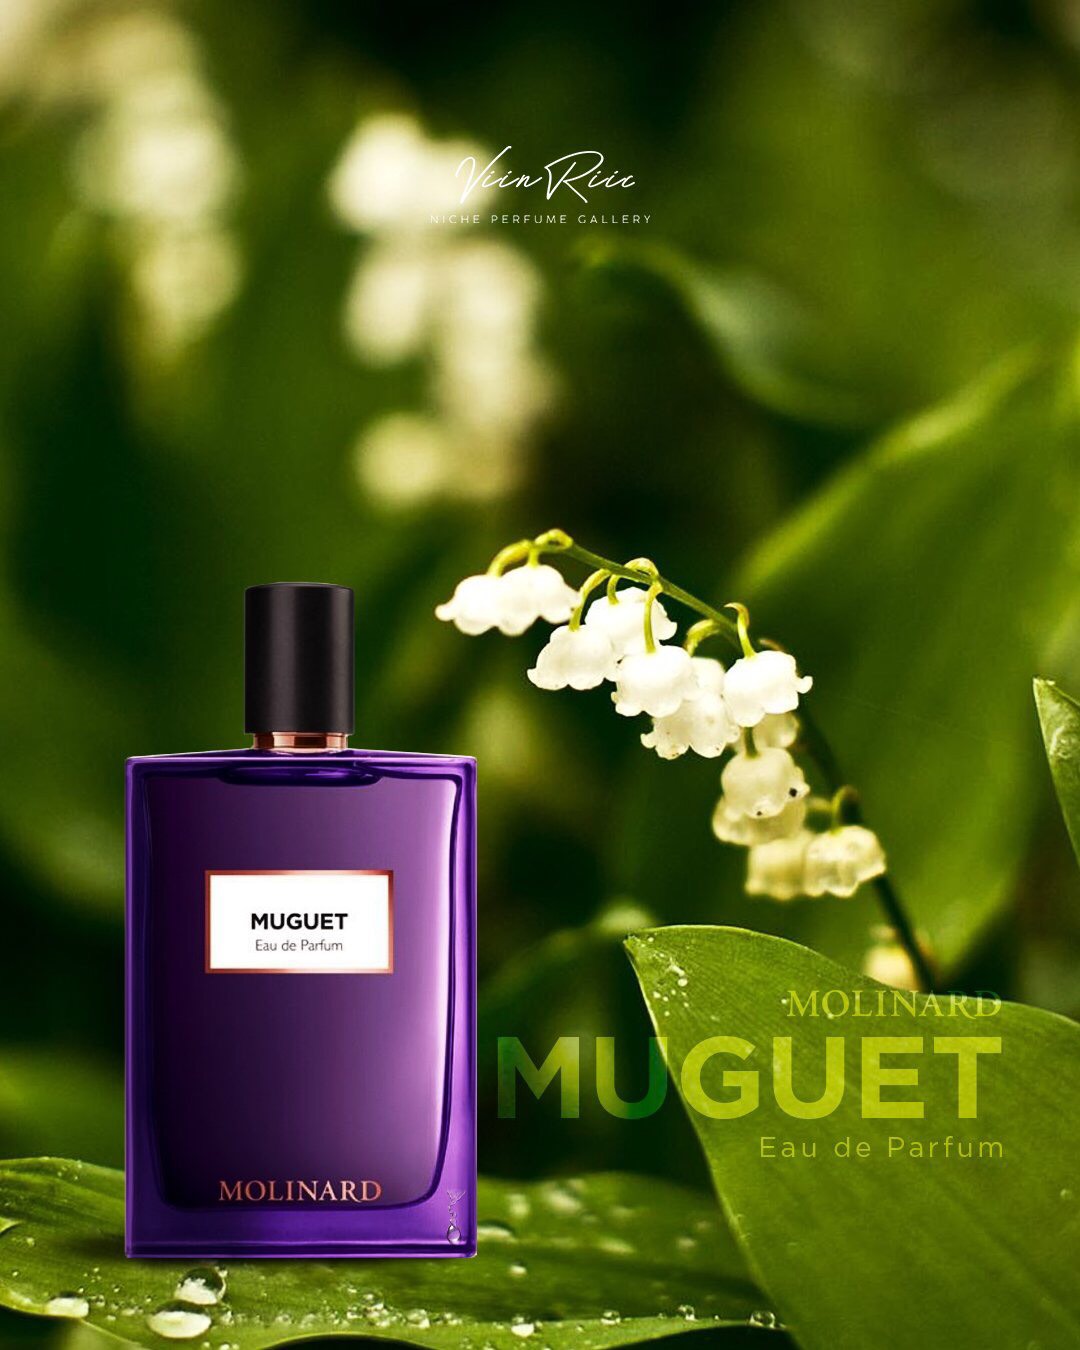 May - The Month of the Scent of Luck